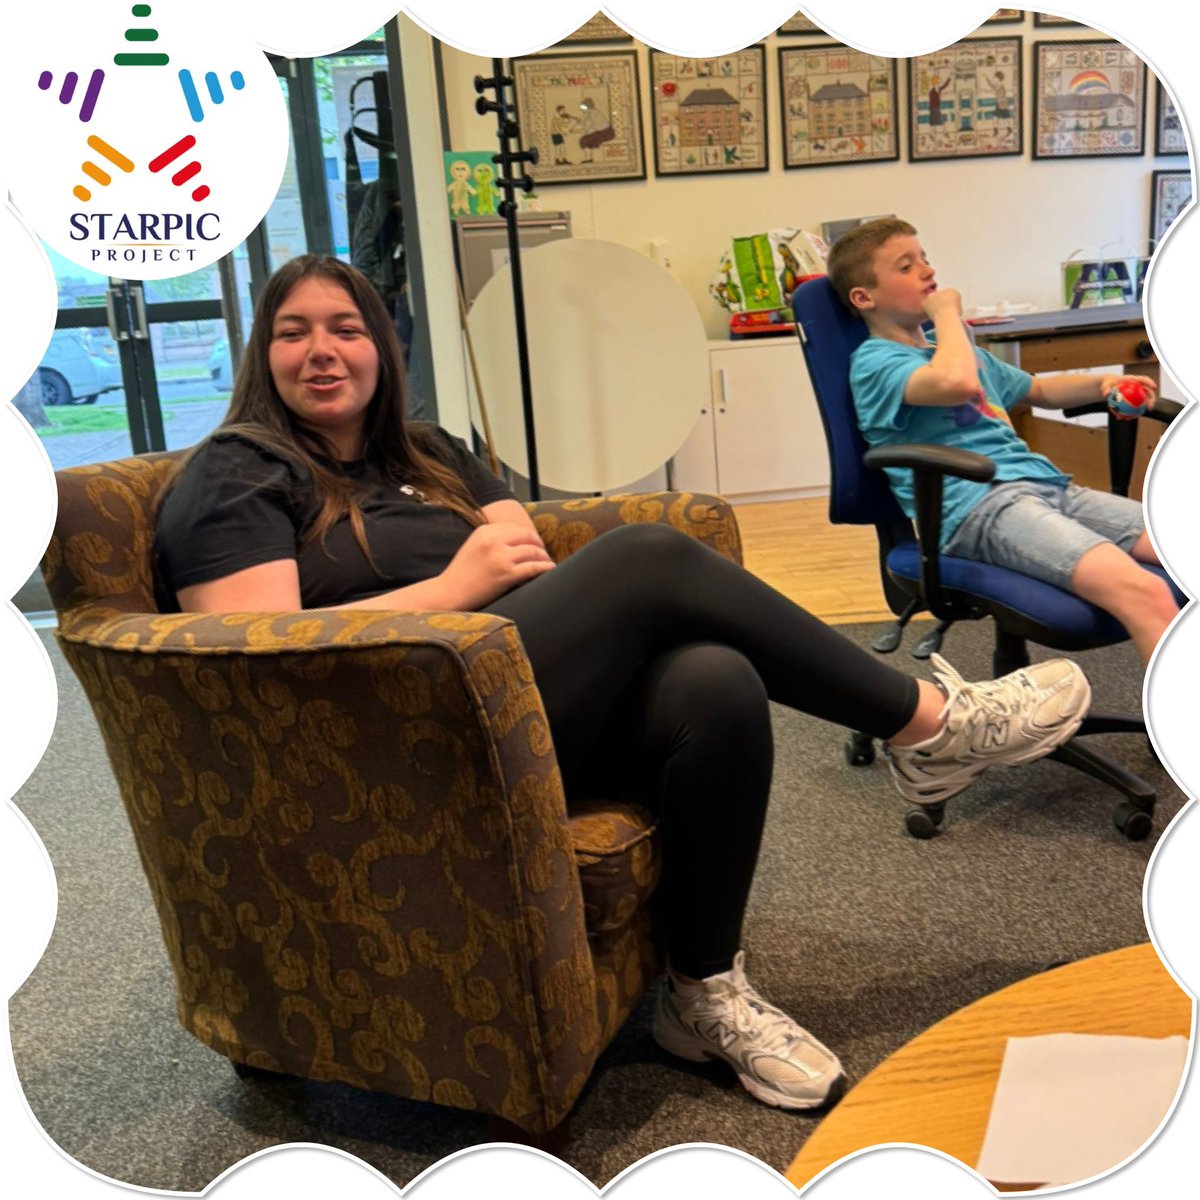 The Wednesday group being creative and having fun with friends.
_____________________
#youthwork #starpicproject #community #confidence #safespace #learning #transferableskillsets
@YouthScotland